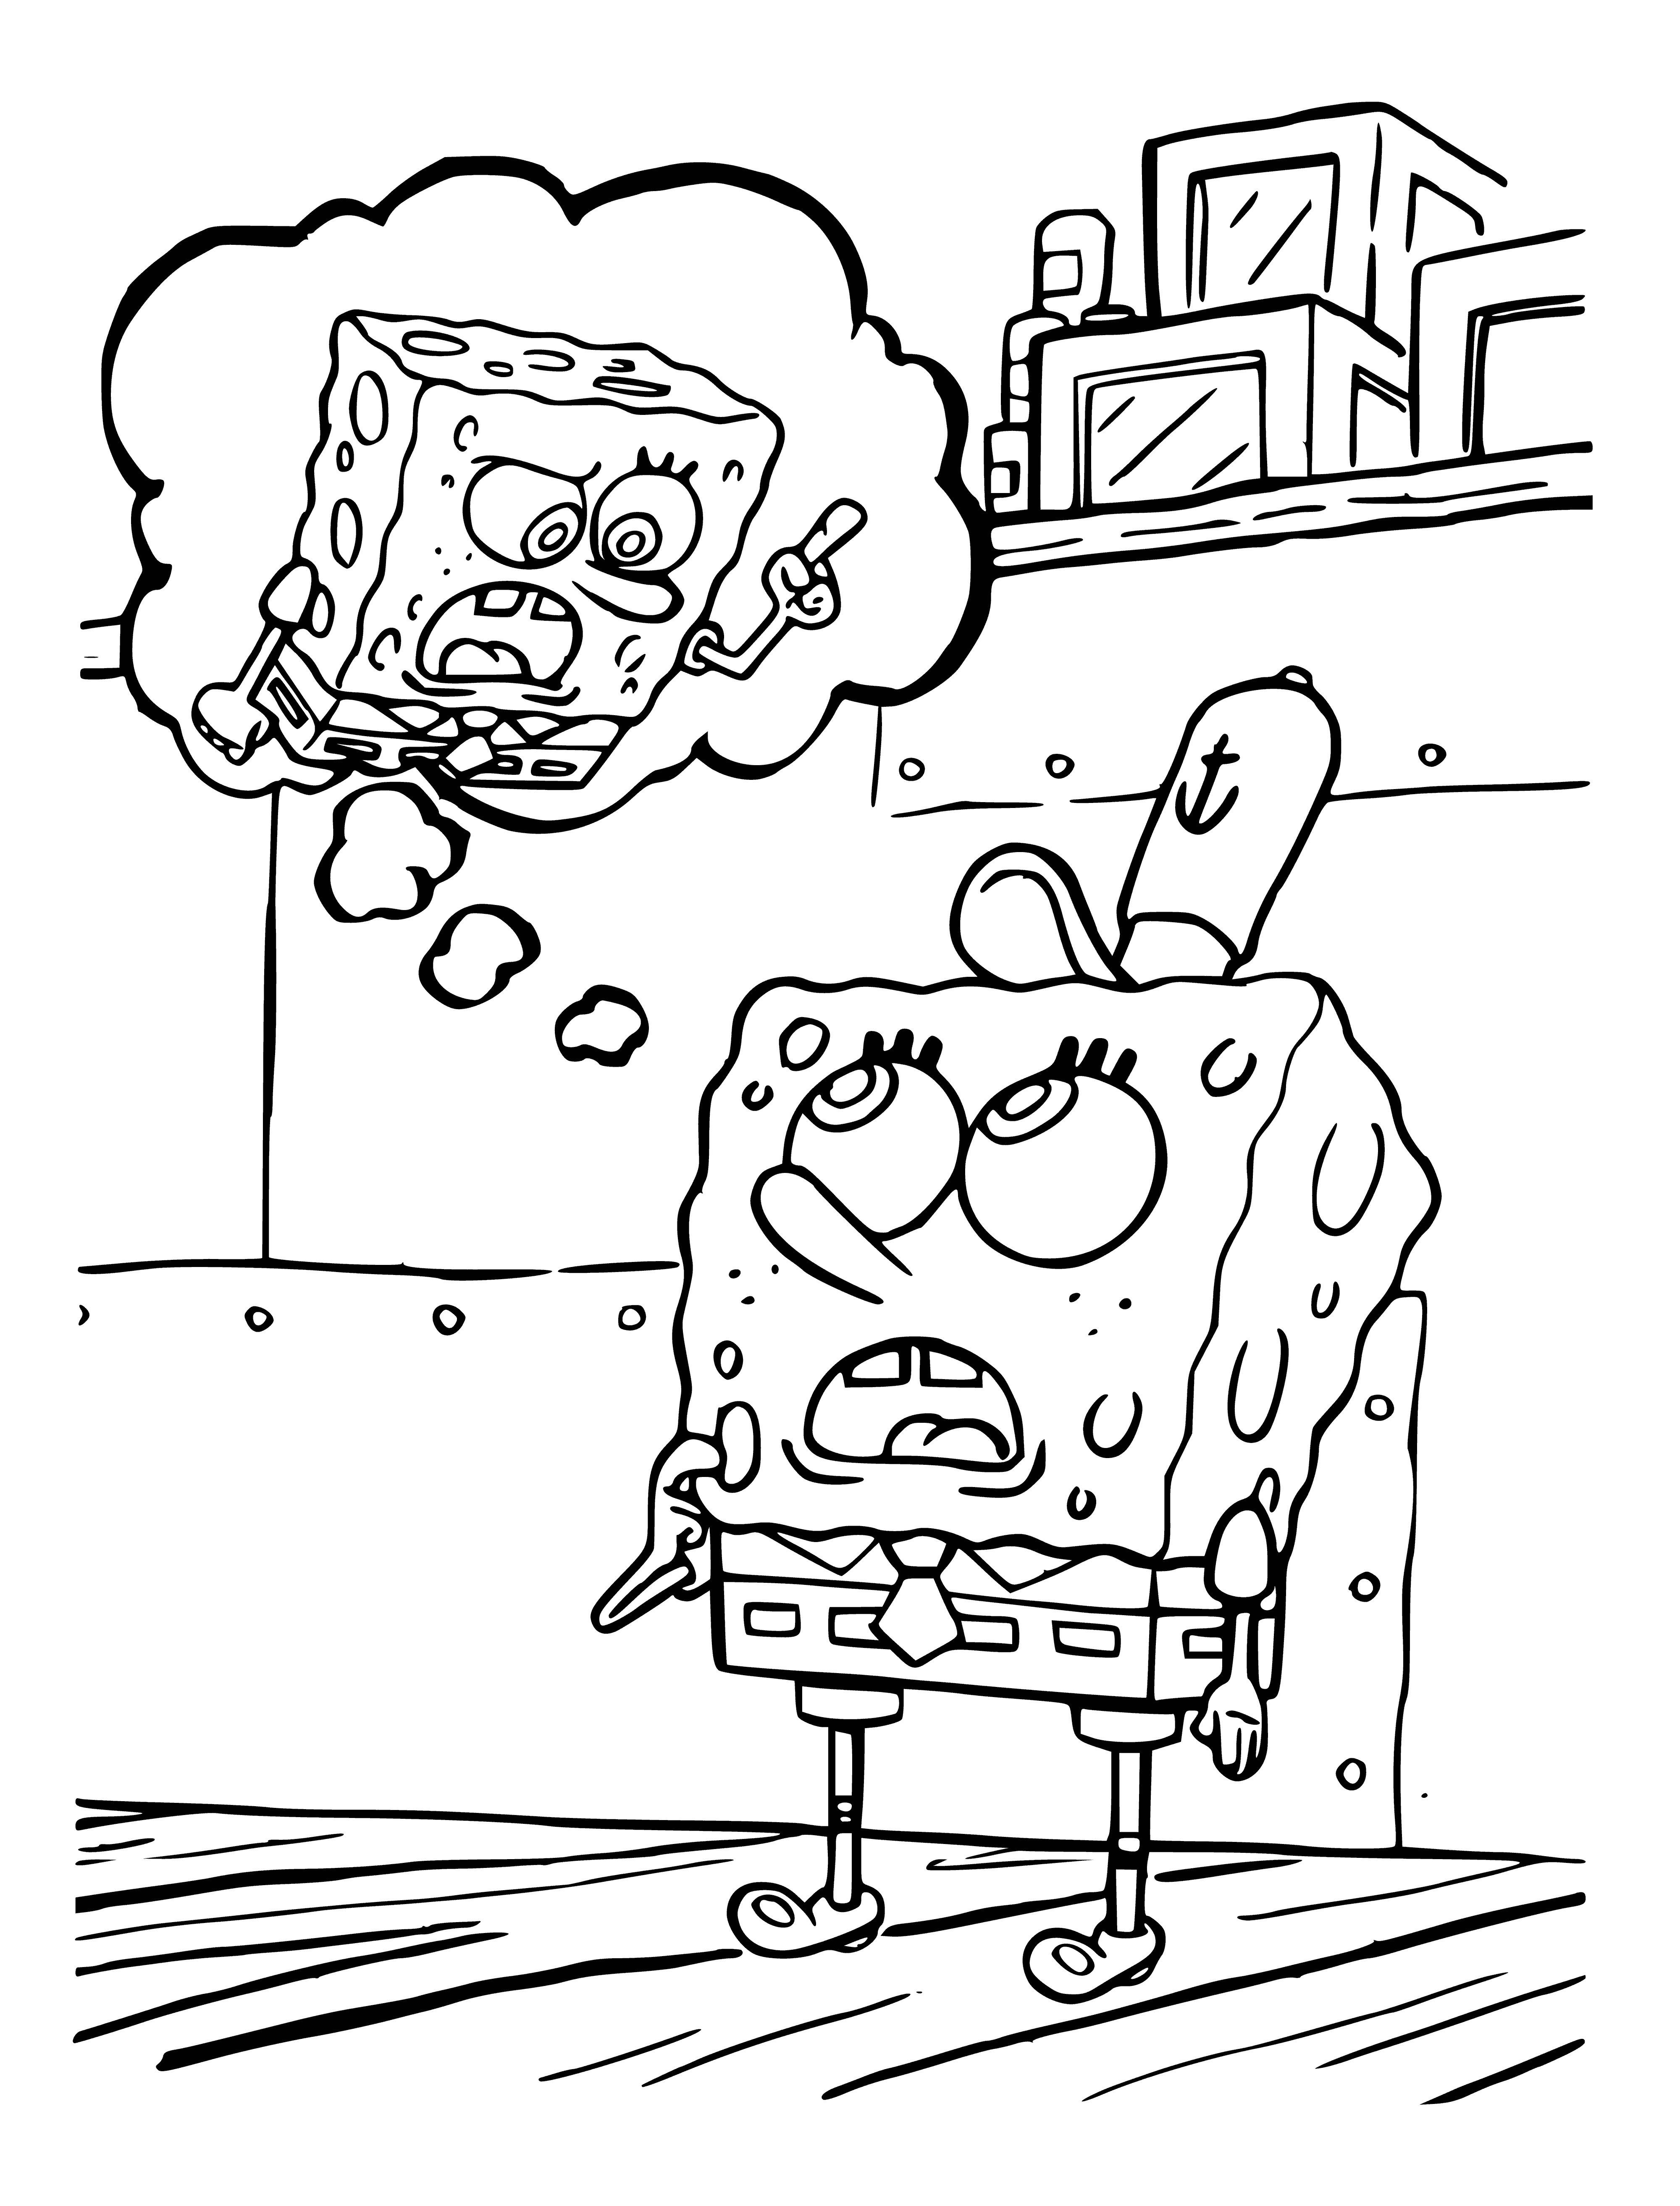 coloring page: SpongeBob is a happy, optimistic sponge who loves jellyfishing and his snail Gary. He lives in a pineapple under the sea!